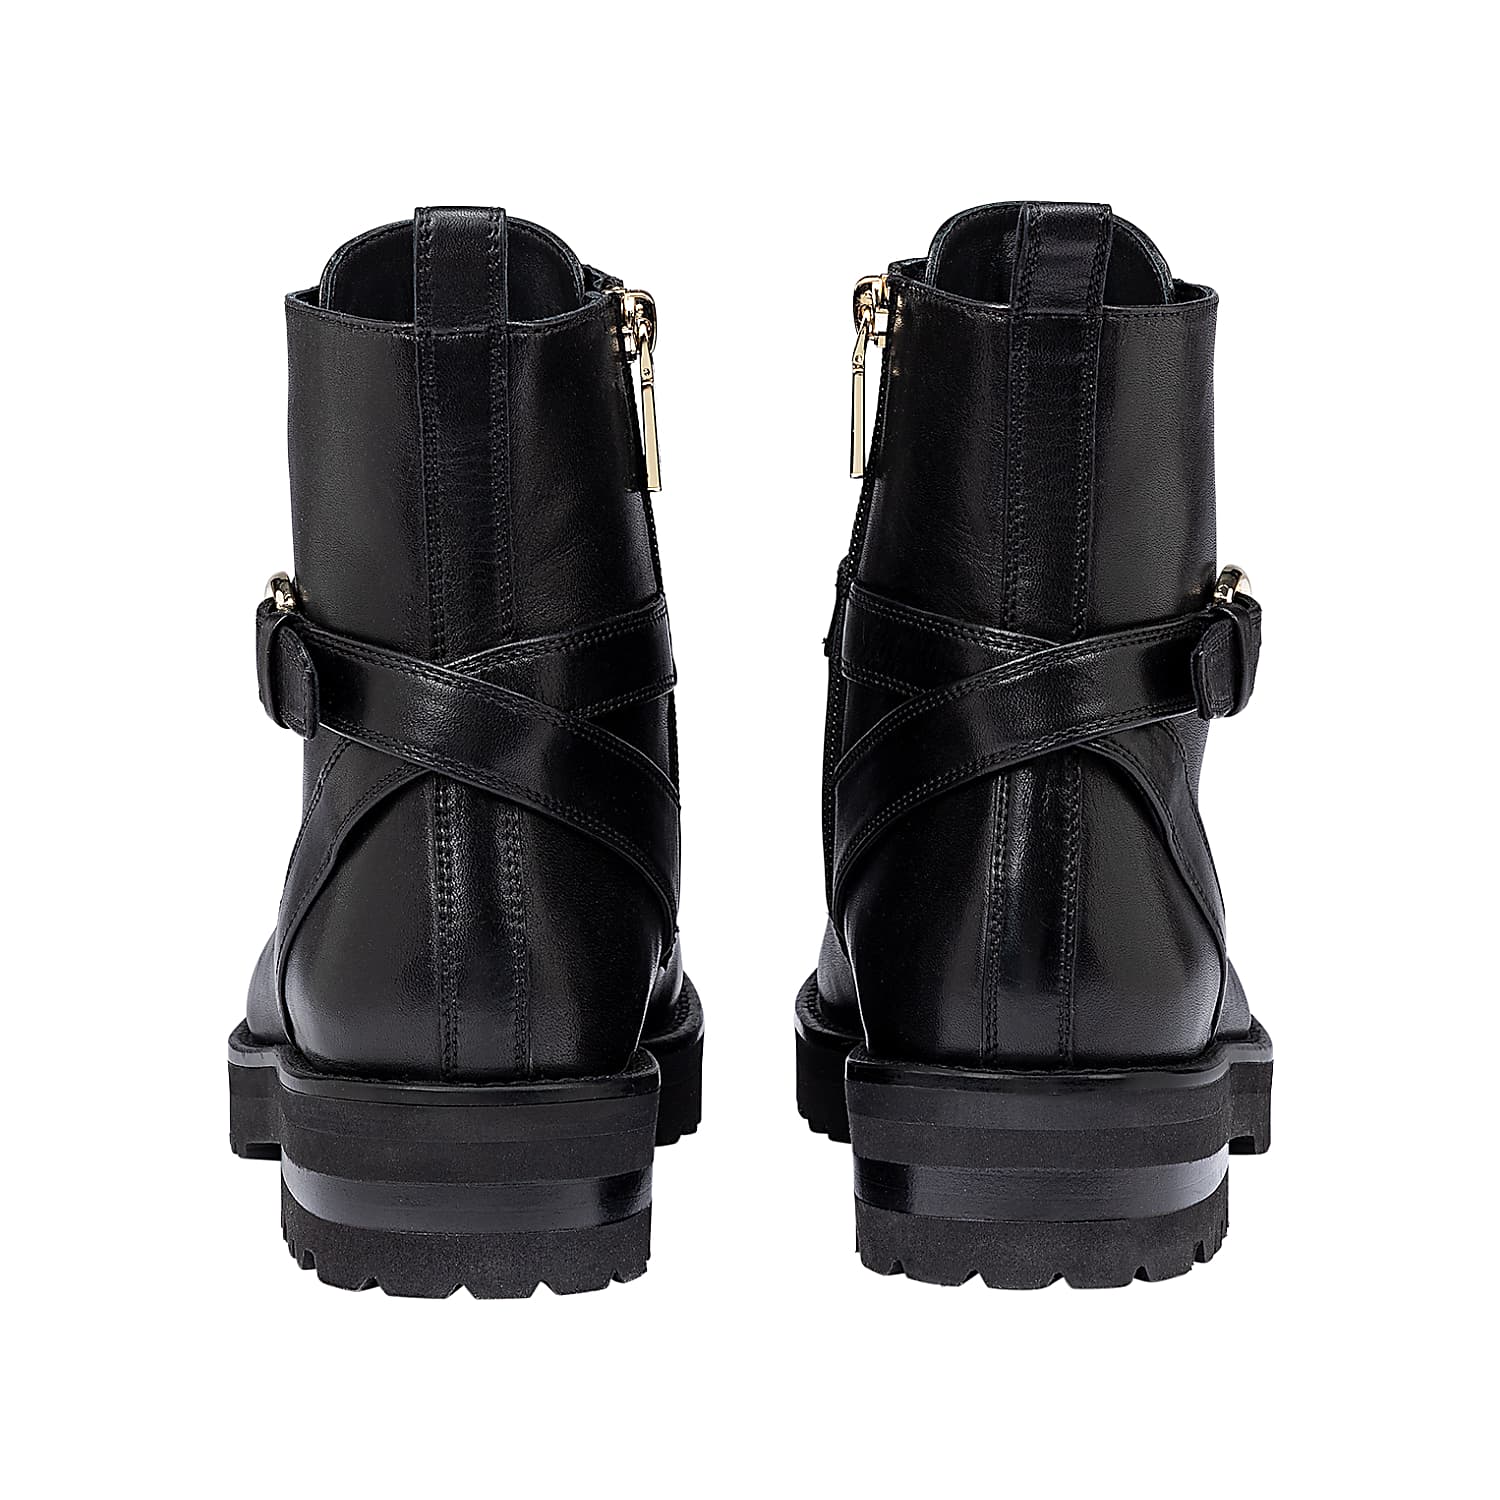 Ava boots with logo buckle